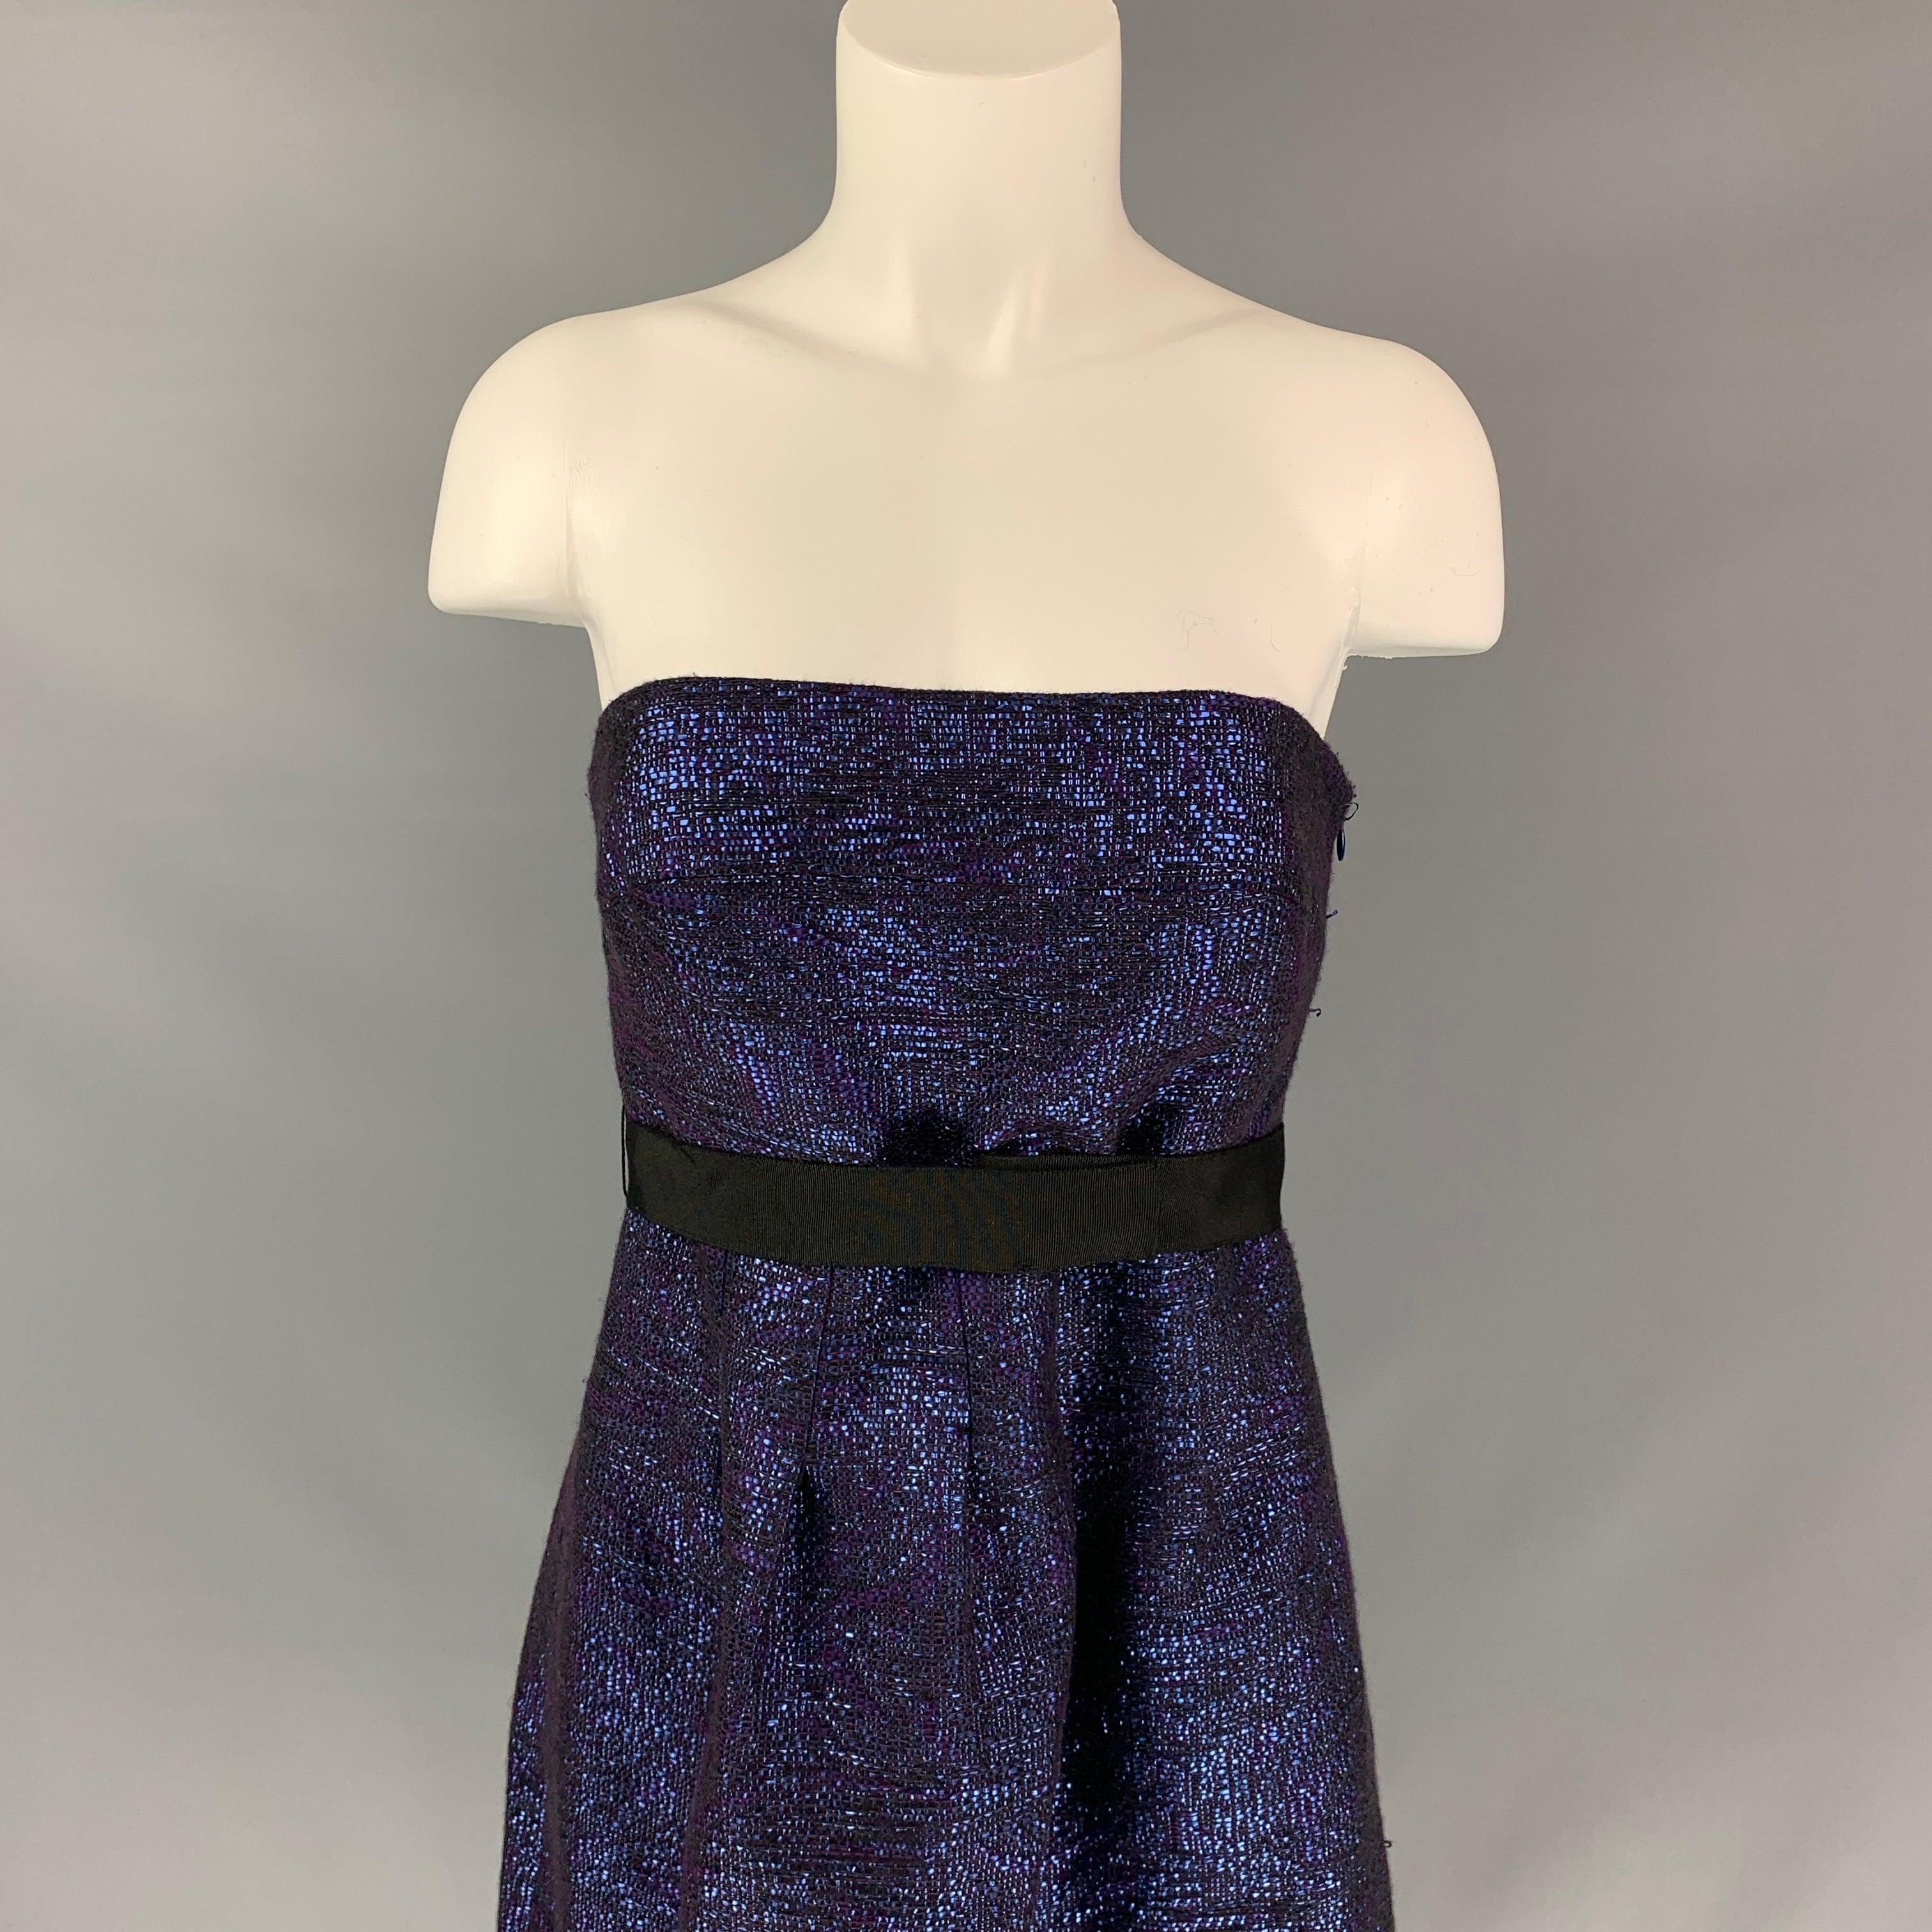 LELA ROSE dress comes in a blue & black acrylic blend featuring a belt strap detail, pleated, hook & loop details, and a side zipper closure.
Very Good
Pre-Owned Condition. 

Marked:   6 

Measurements: 
  Bust: 30 inches Waist: 28 inches  Hip: 38